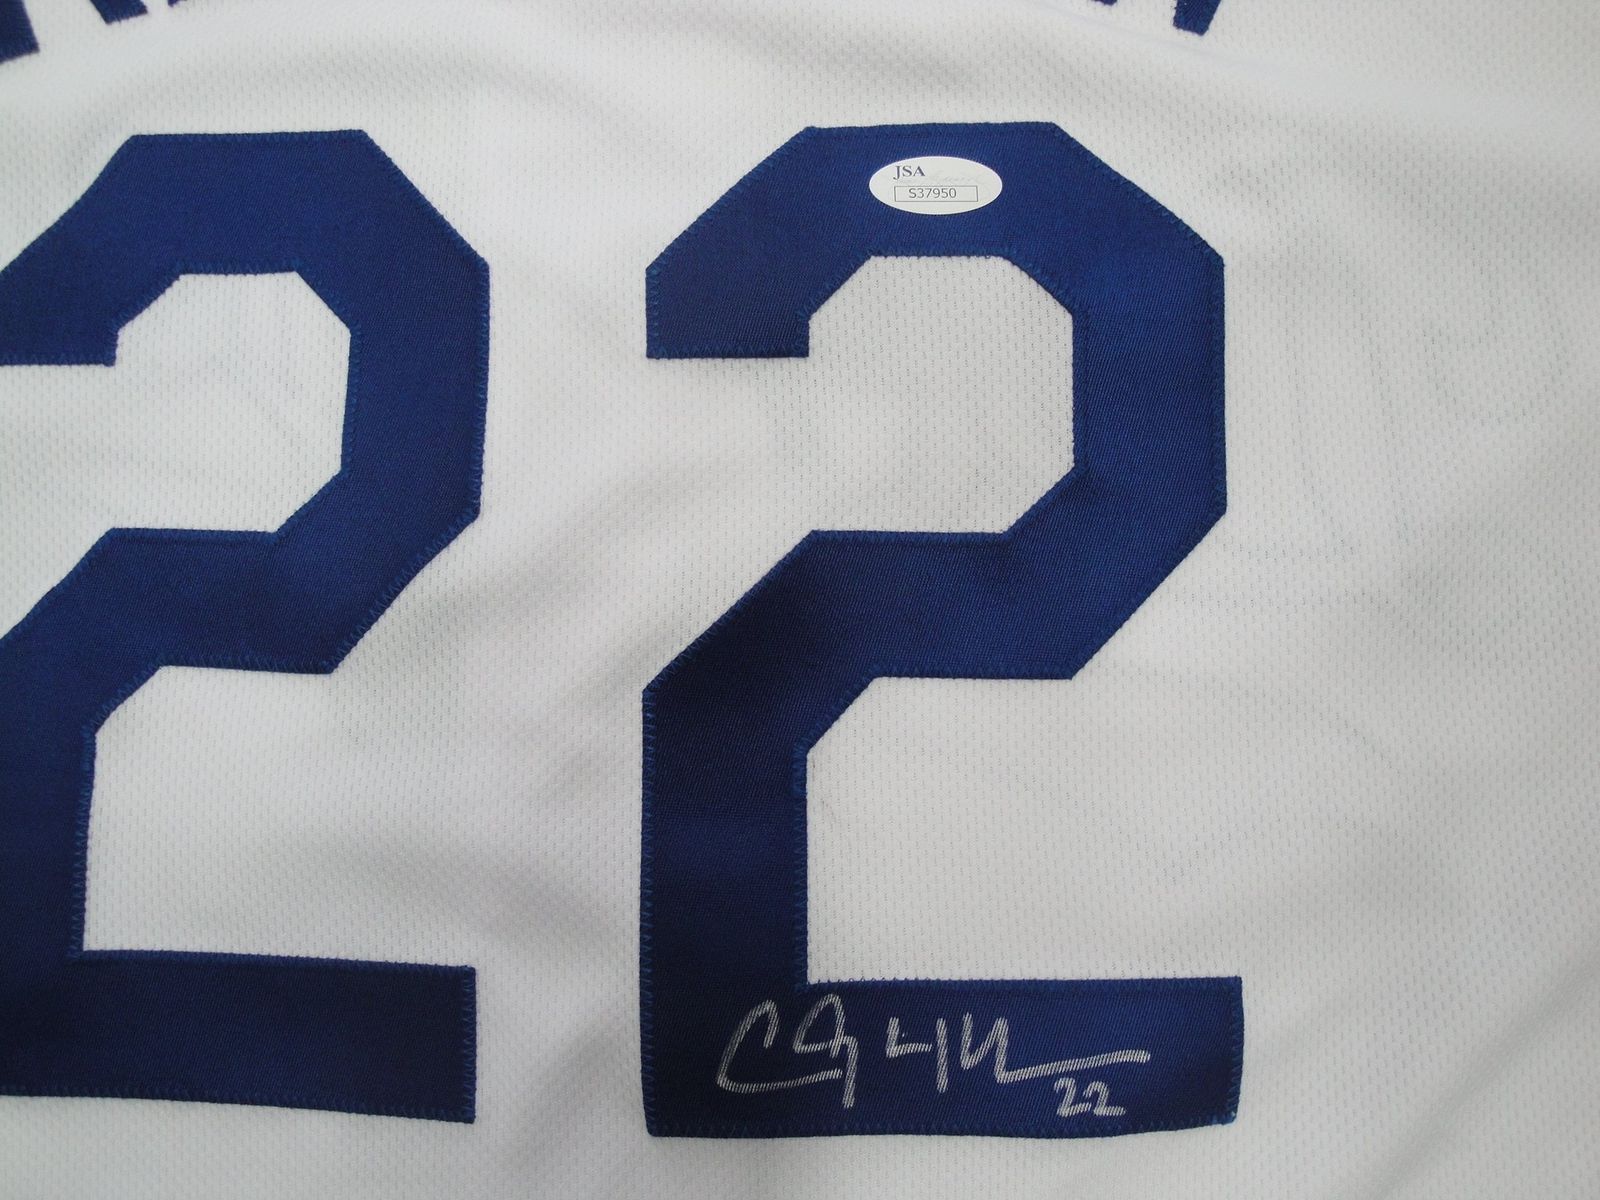 Clayton Kershaw Signed Autographed Los Angeles Dodgers Baseball Jersey –  Sterling Autographs